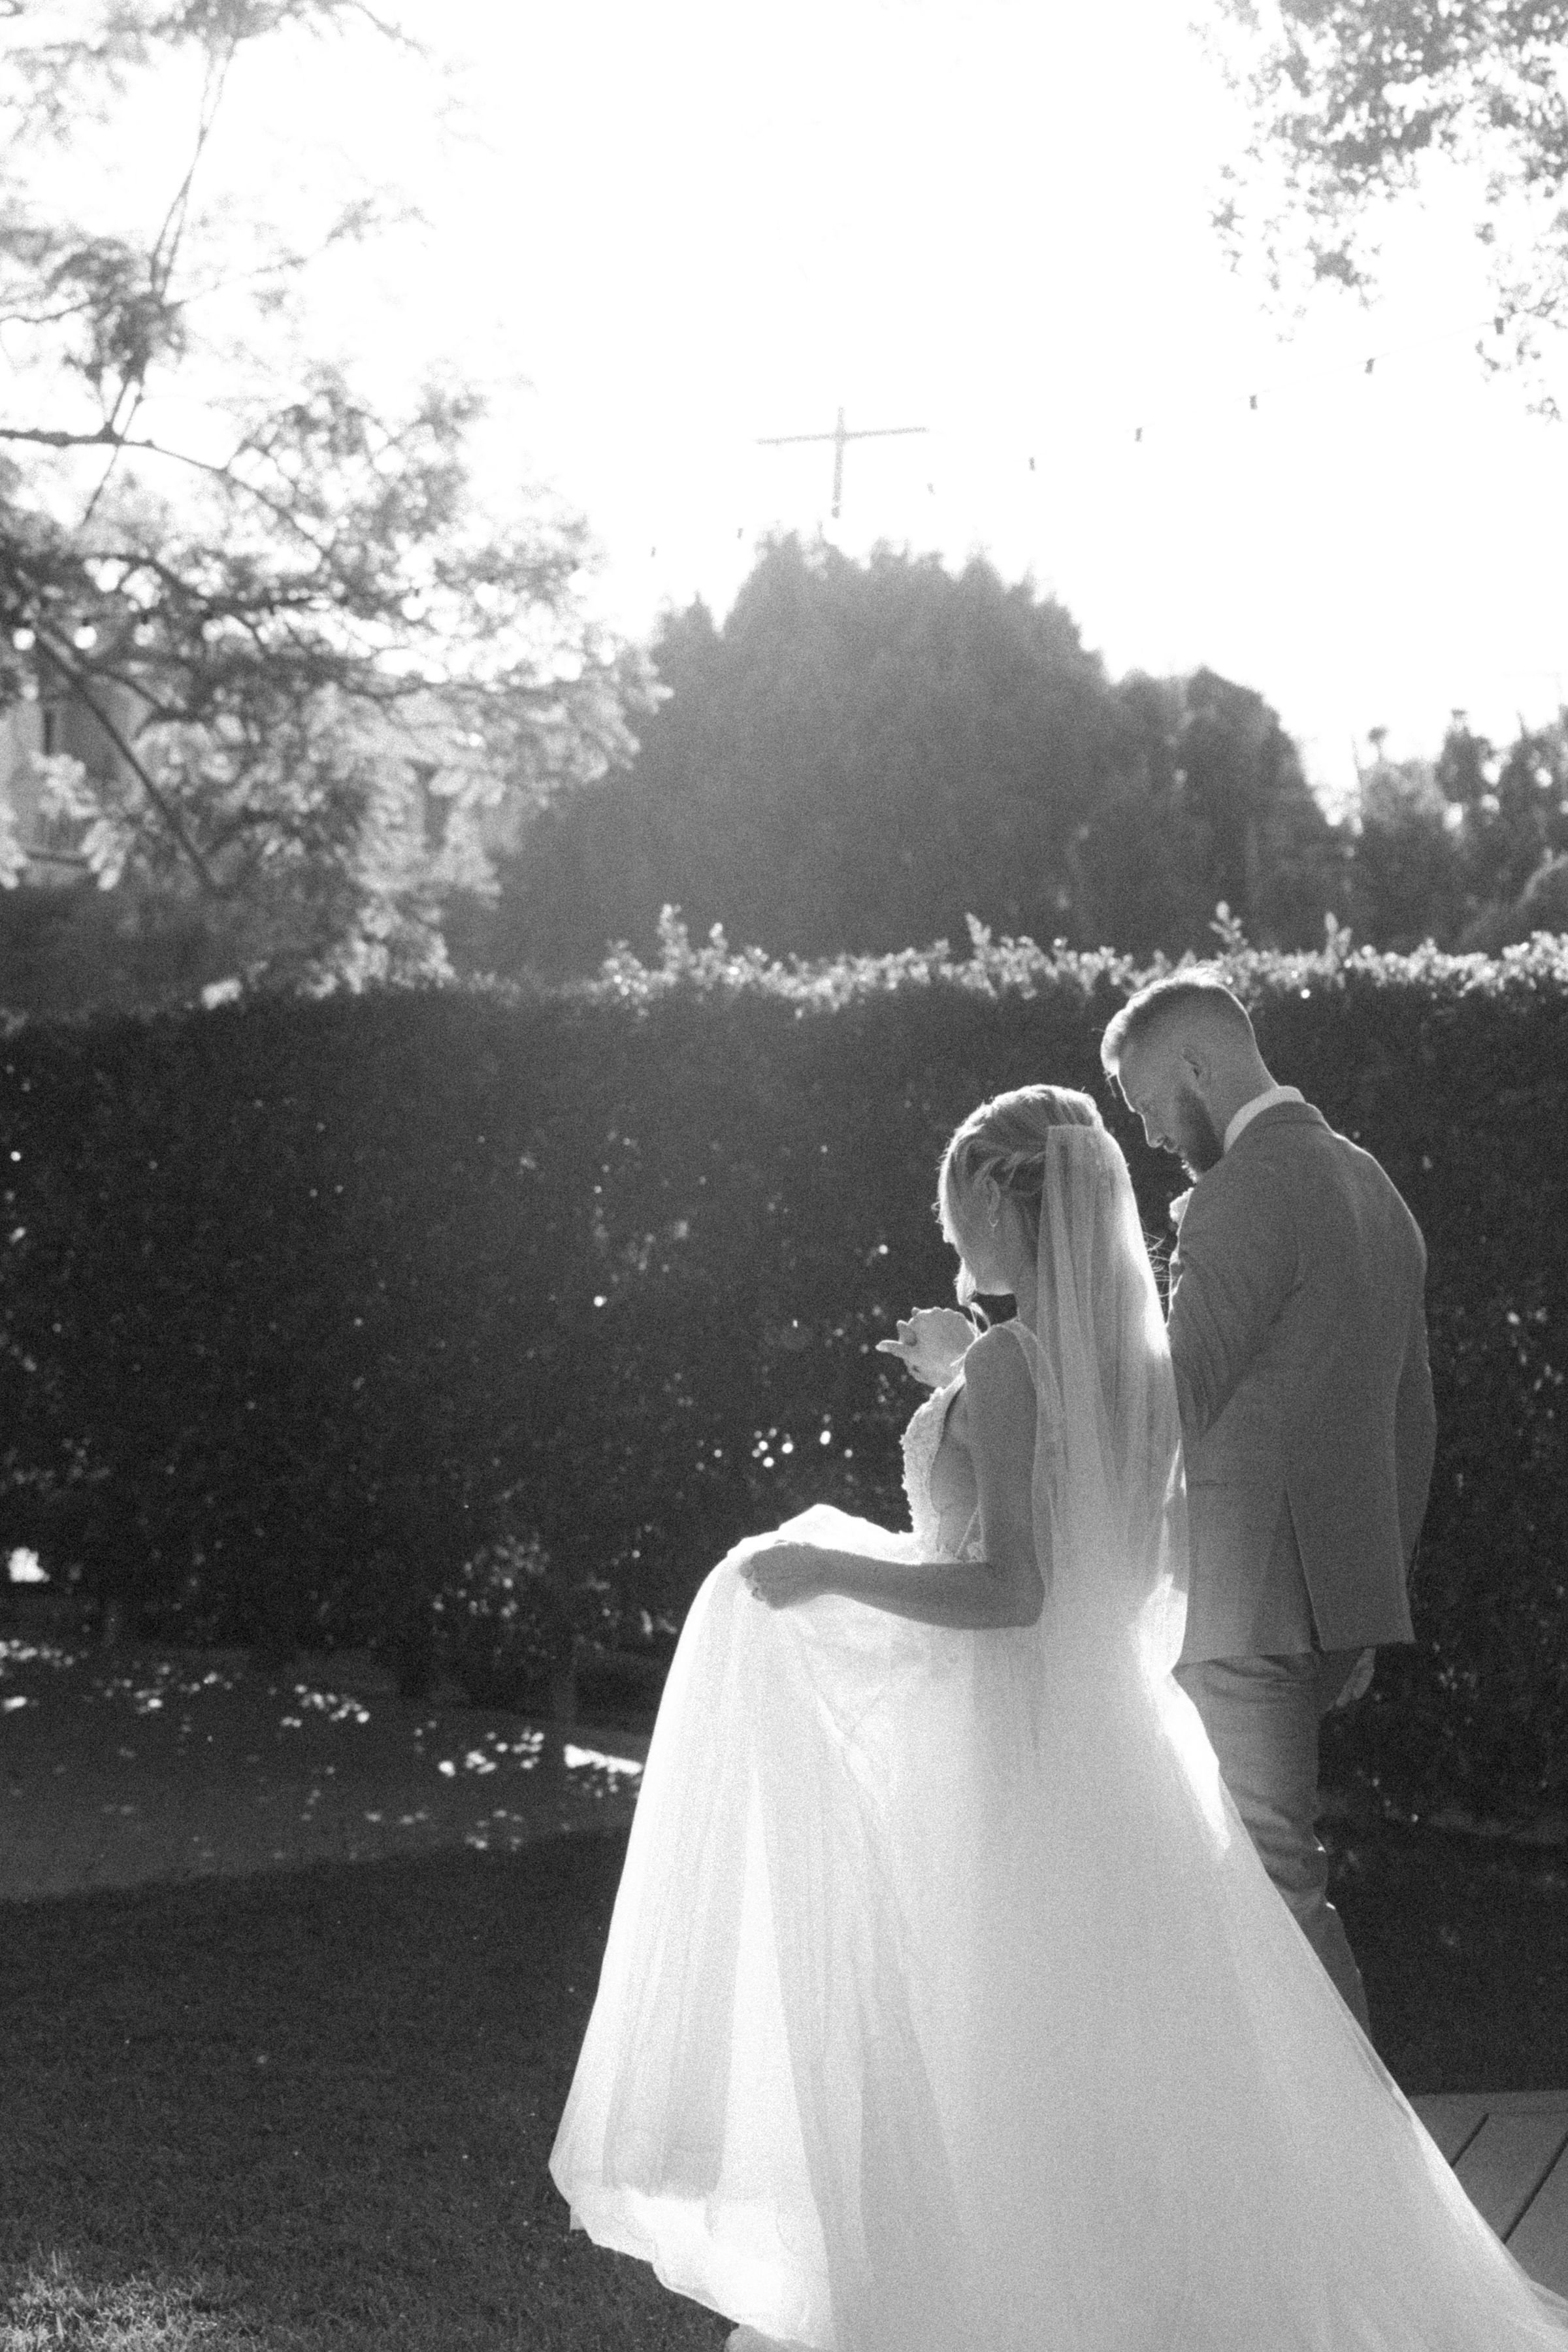 www.santabarbarawedding.com | The Santa Barbara Club | Jen Rodriguez | Gatherings for Good | Blooms by Melly | Under the Veils | Couple Walking in the Garden